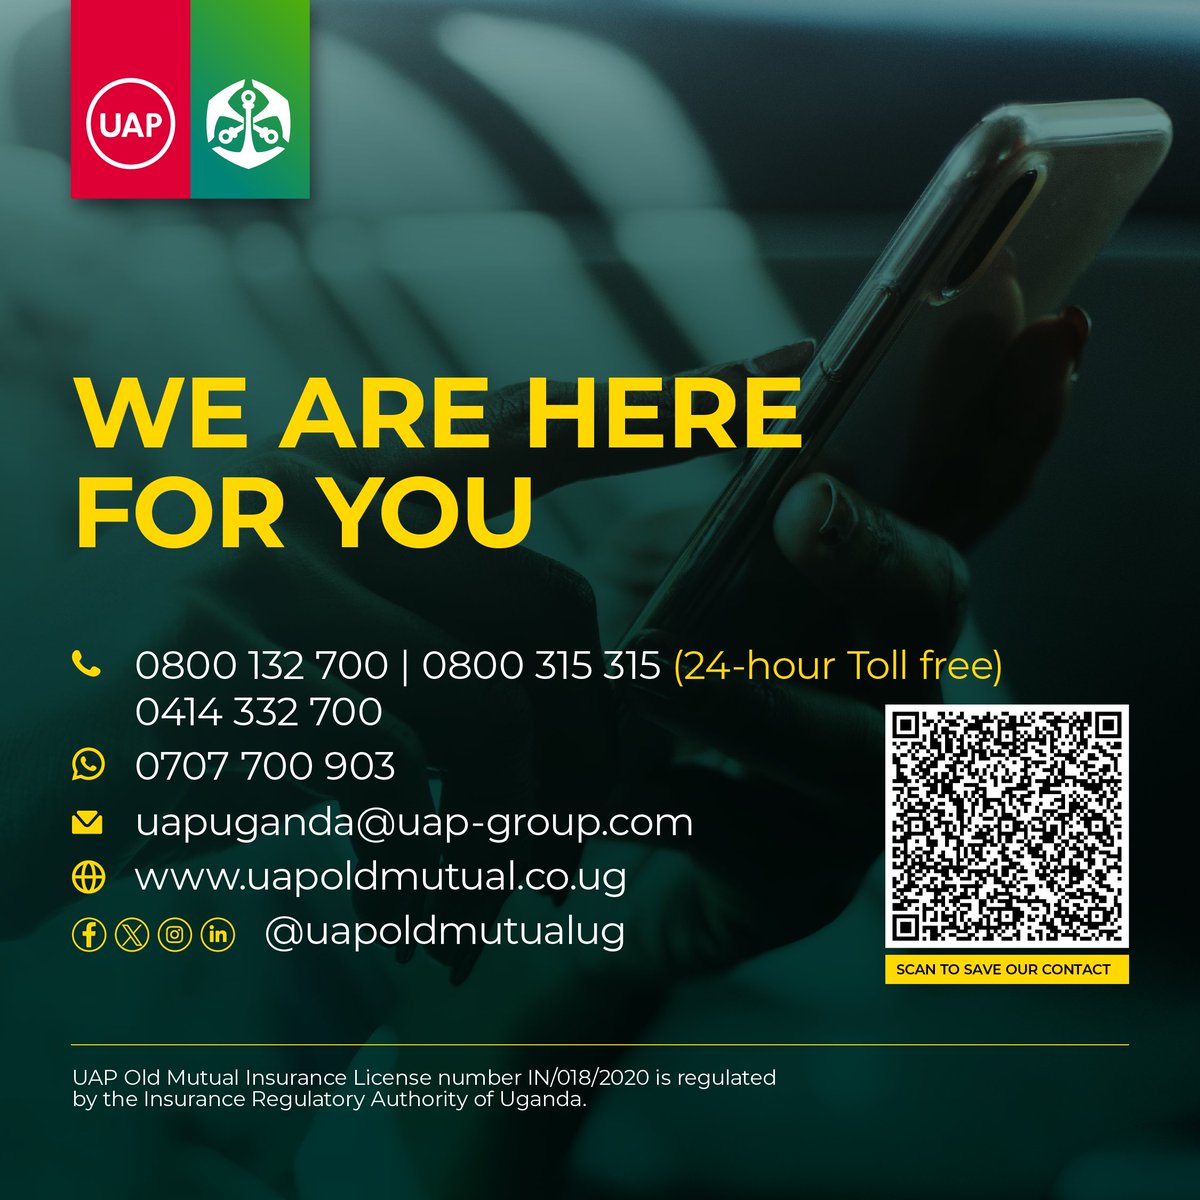 Got questions or need assistance? Our contact information has been updated for your convenience. 

Reach out to us using the details below for a prompt response. 👇

#TutambuleFfena